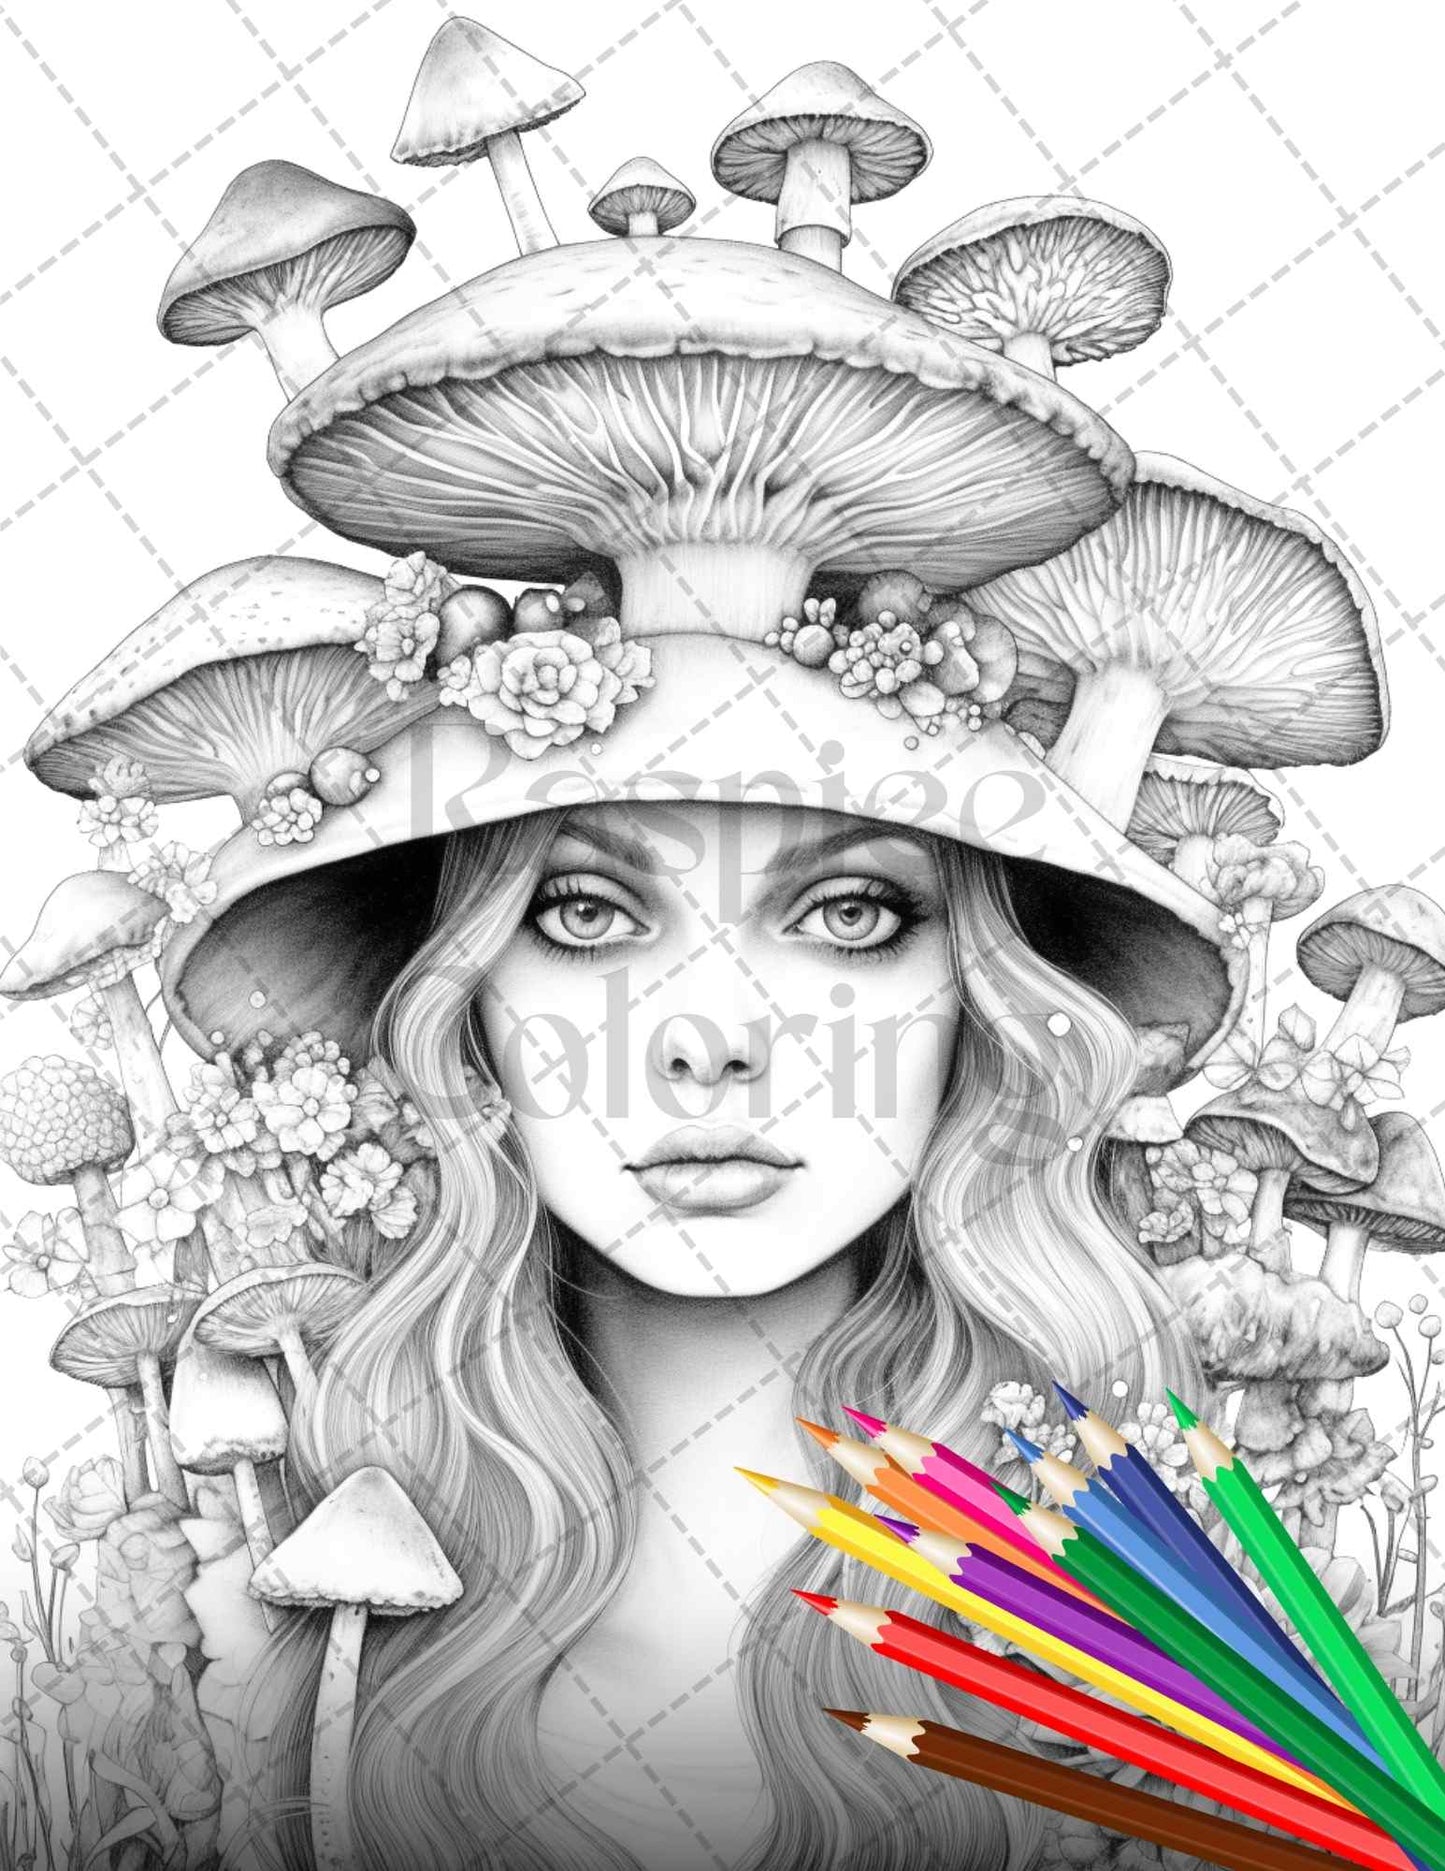 grayscale coloring pages, fairy coloring pages, mushroom art, printable coloring pages, adult coloring book